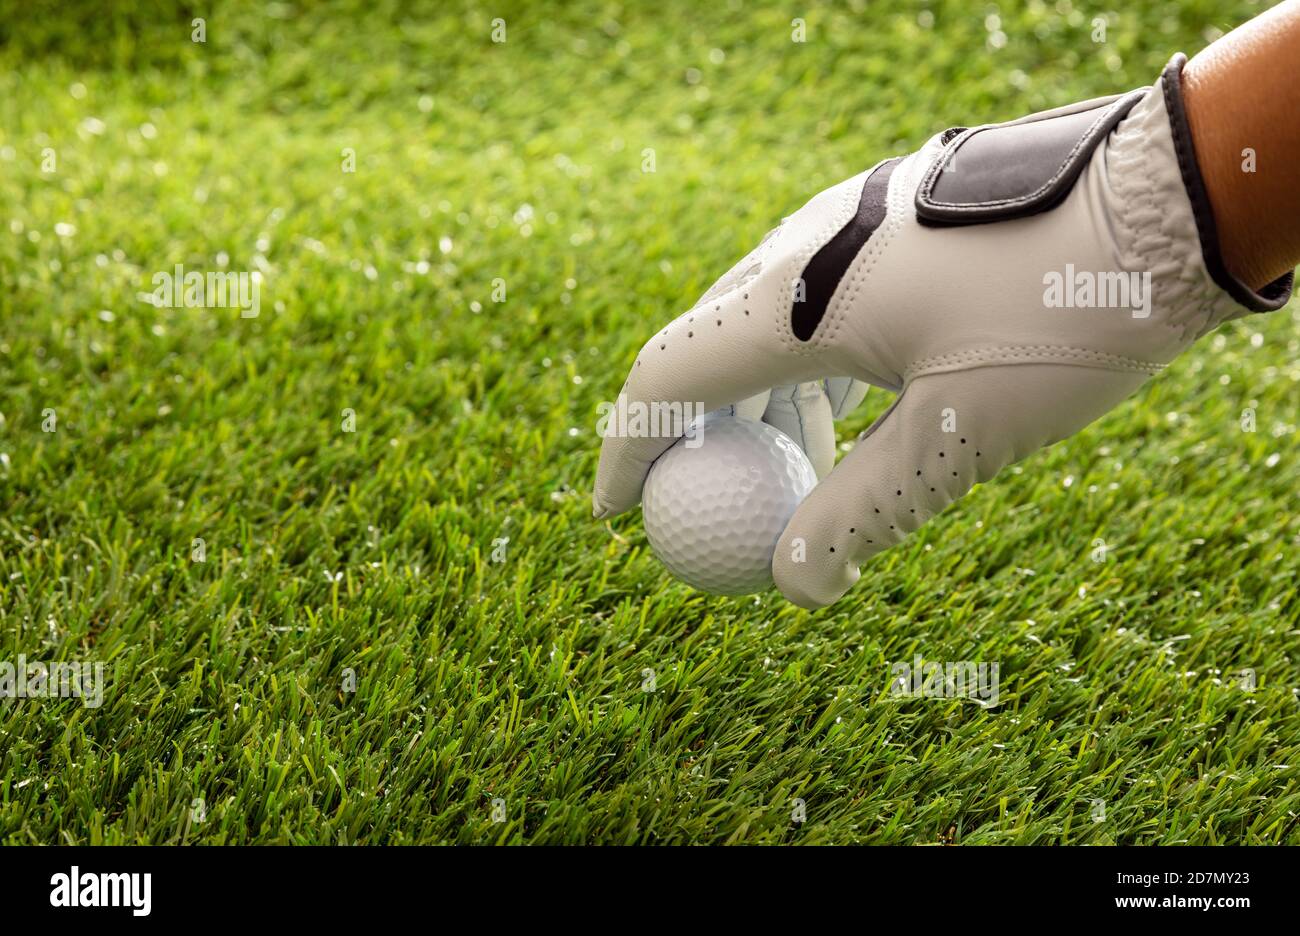 Hand in golf glove holding a golfball, green course lawn background, close up view. Golfing sport and club concept. Copy space, template Stock Photo